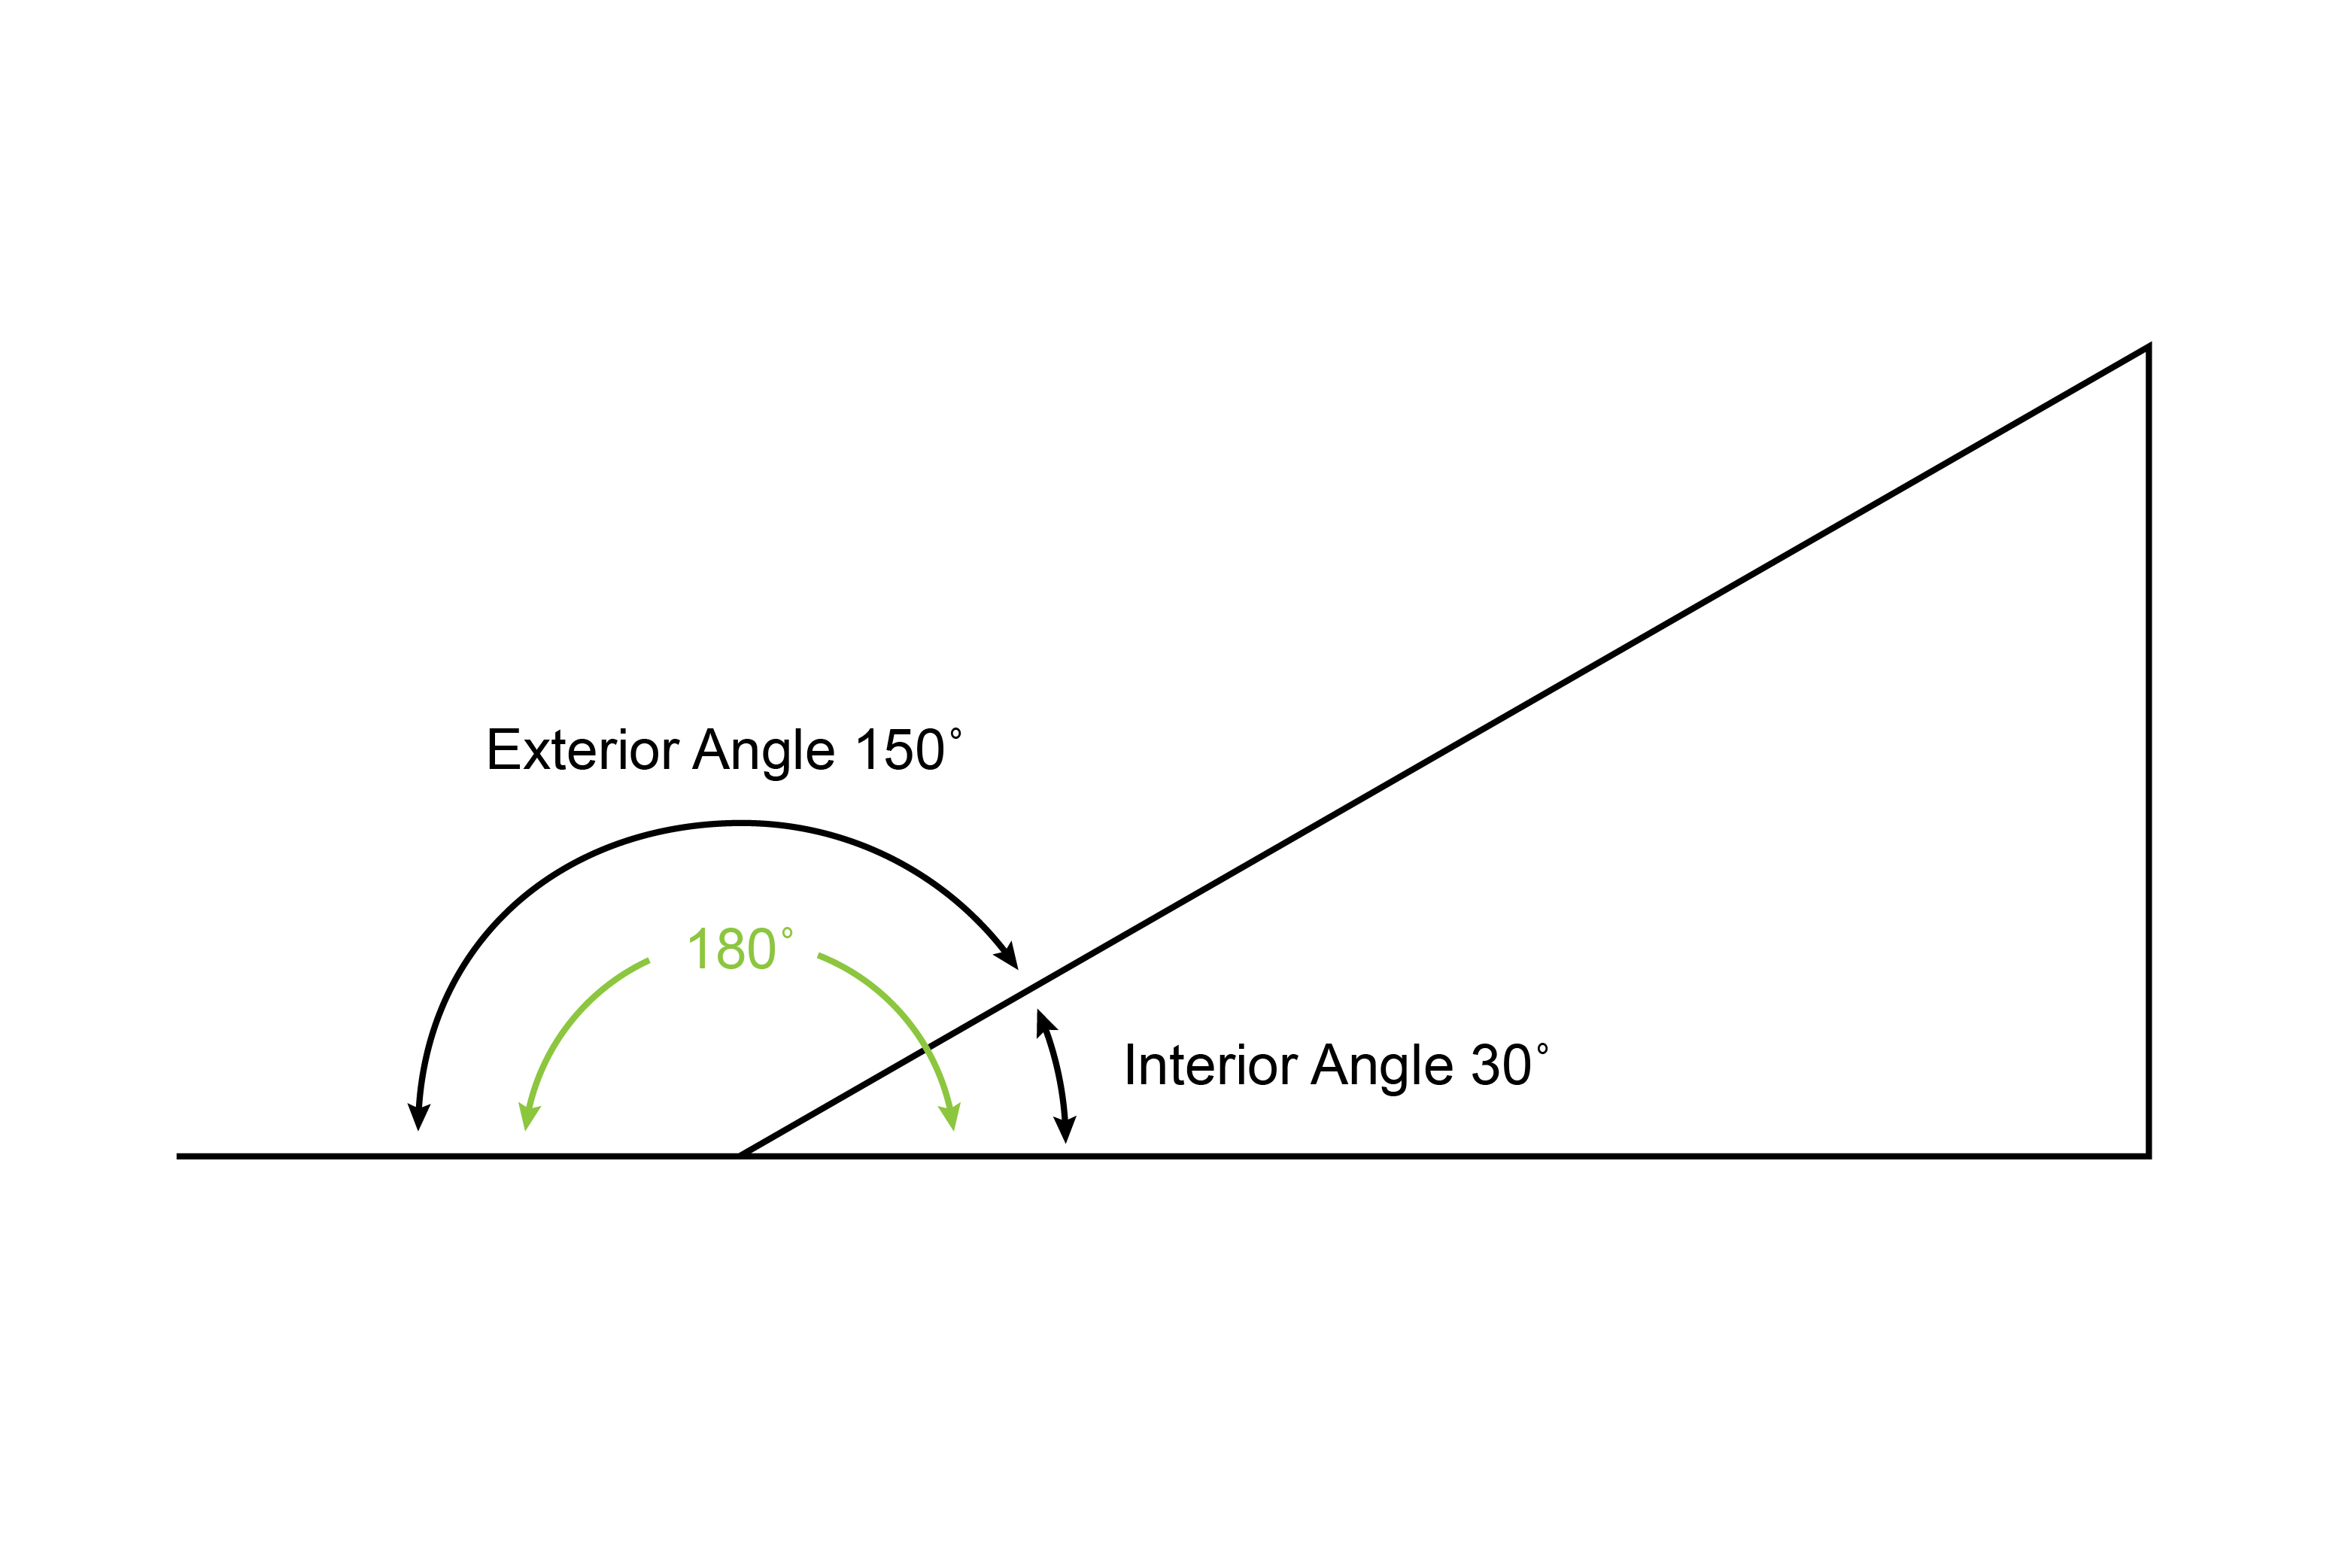 To work out the interior or exterior angle of a polygon you need to define the interior or exterior angle